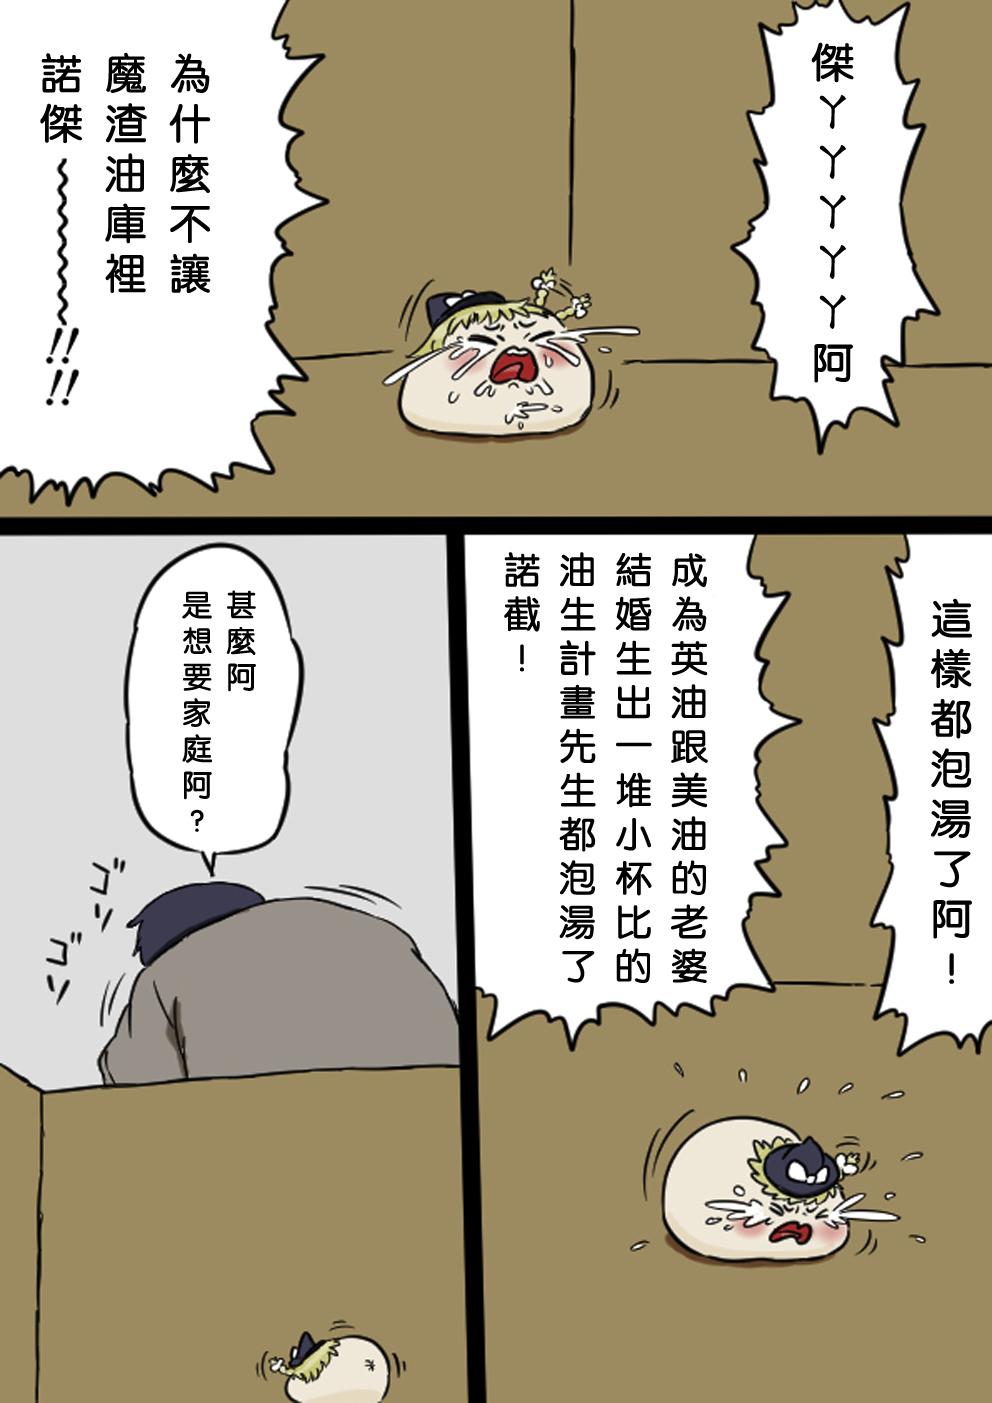 Moan すべてをてにいれたまりちゃ（Chinese） - Touhou project Casal - Page 9